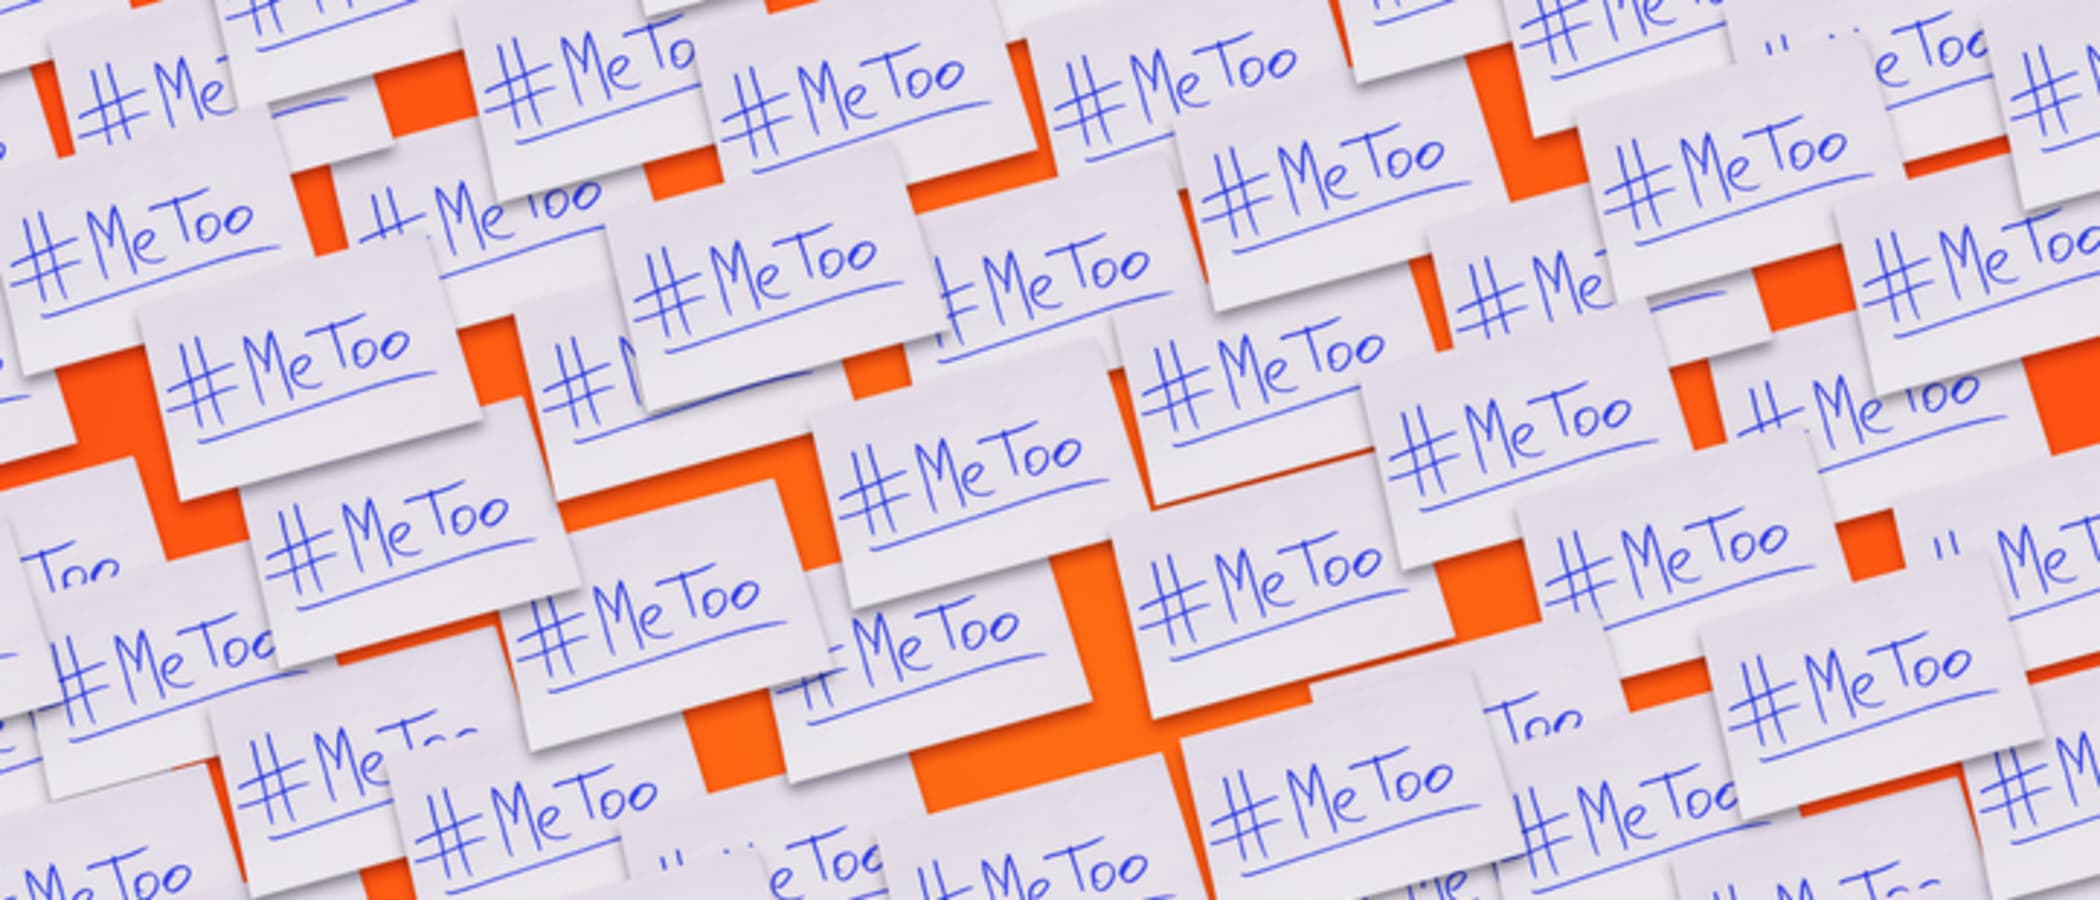 Social Media Is a Major Consideration in Wave of Sexual Harassment Allegations